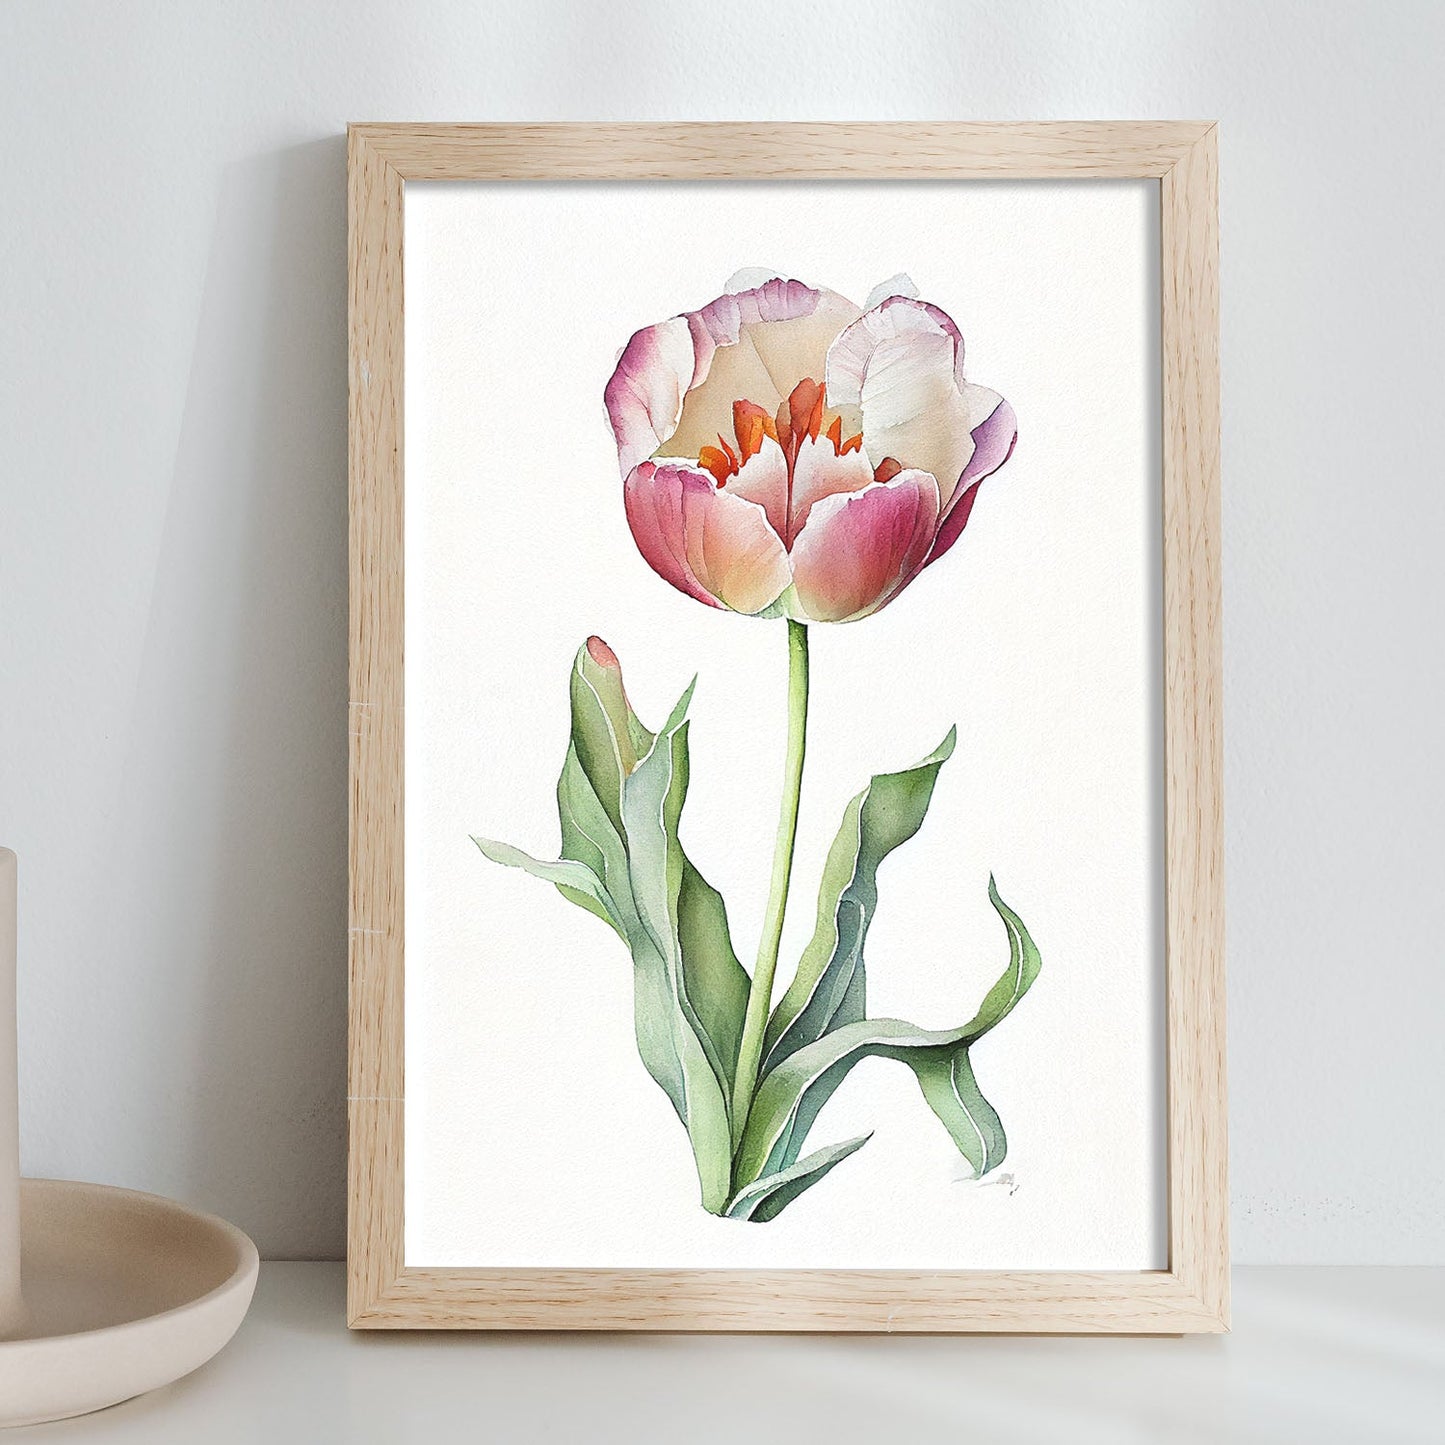 Nacnic watercolor minmal Tulip_3. Aesthetic Wall Art Prints for Bedroom or Living Room Design.